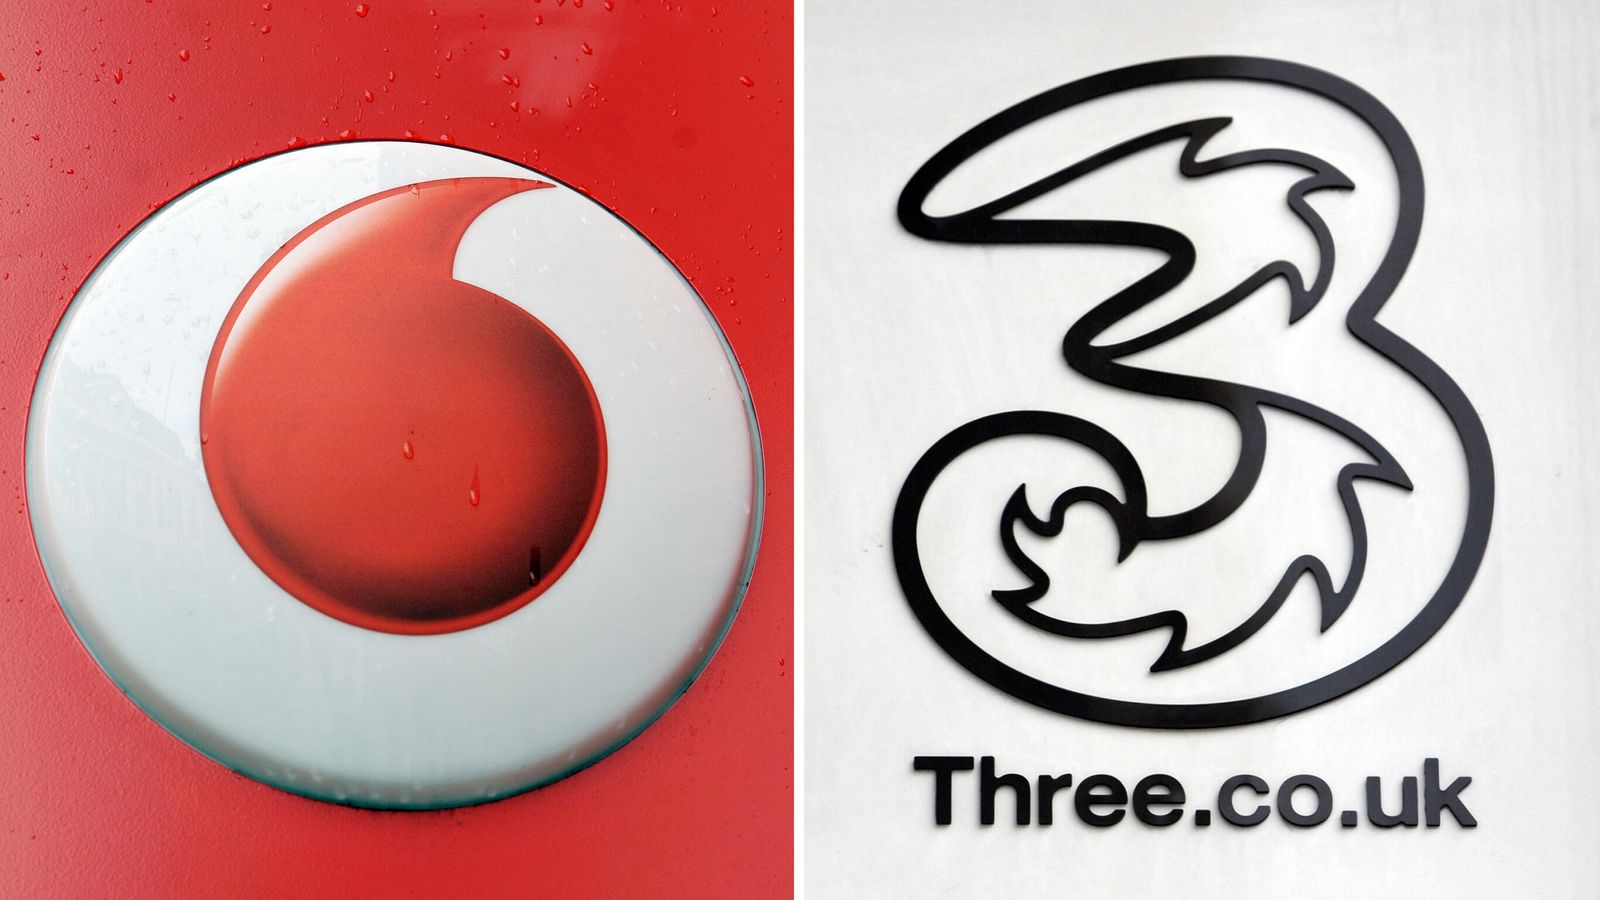 Vodafone and Three UK accelerate talks to dial up 'merger' | Business News  | Sky News